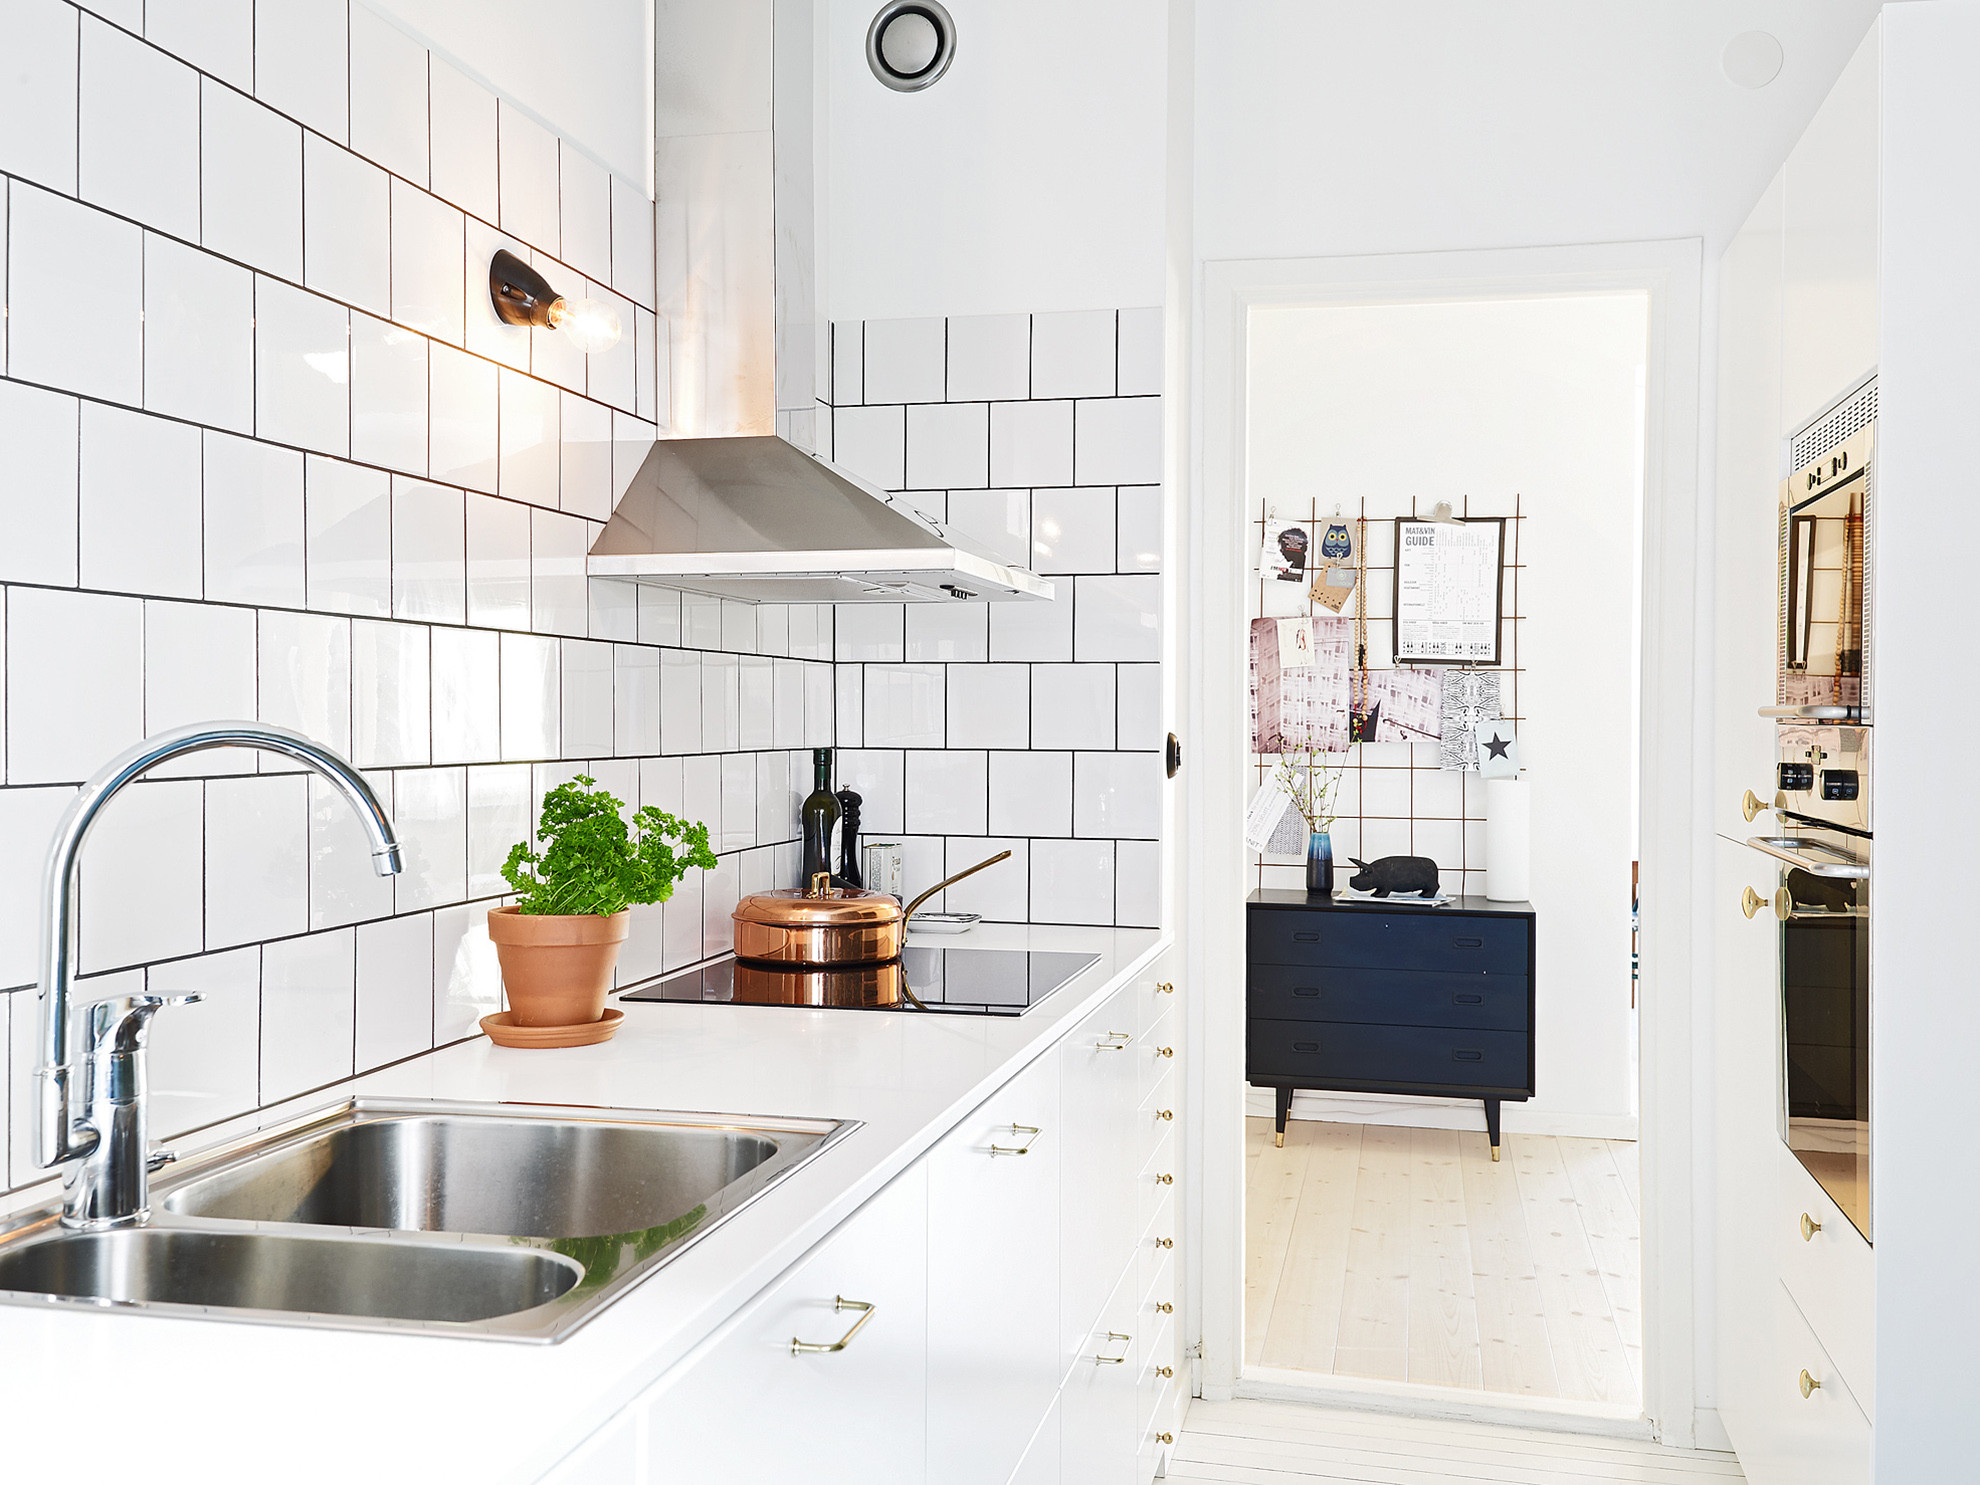 White Kitchen Tile
 Kitchen Subway Tiles Are Back In Style – 50 Inspiring Designs